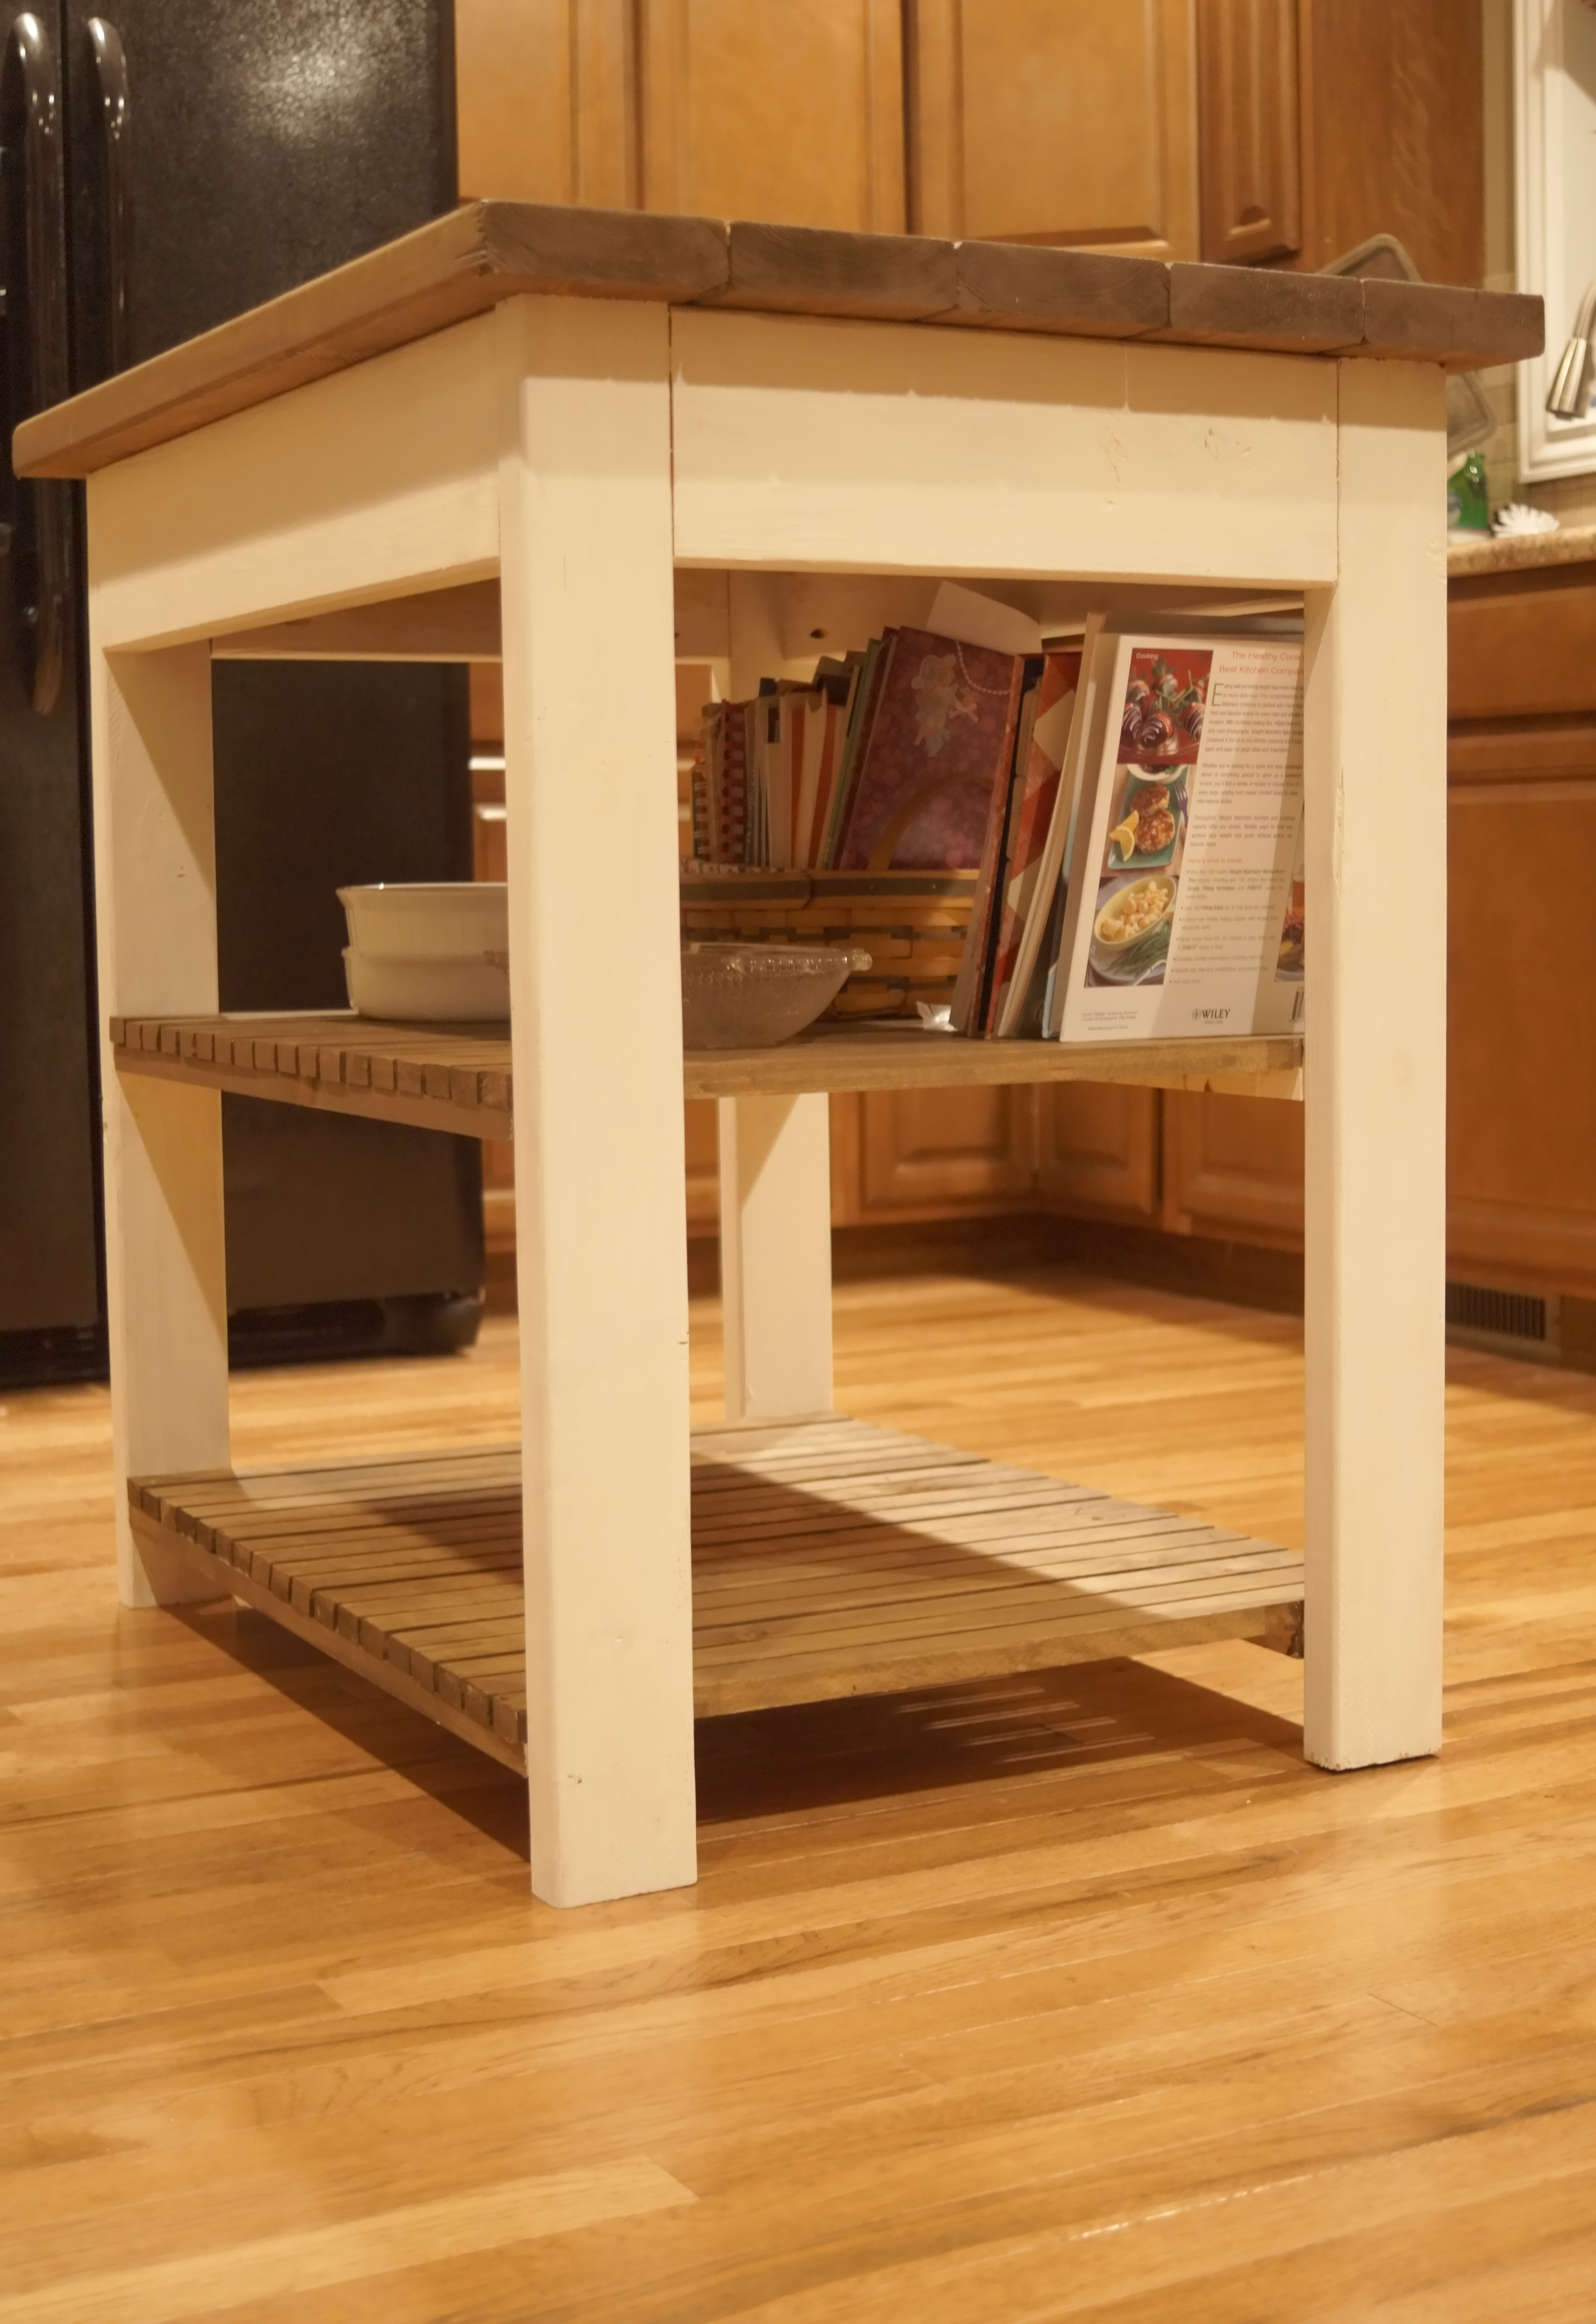 How to build a kitchen island with butcher block top 3